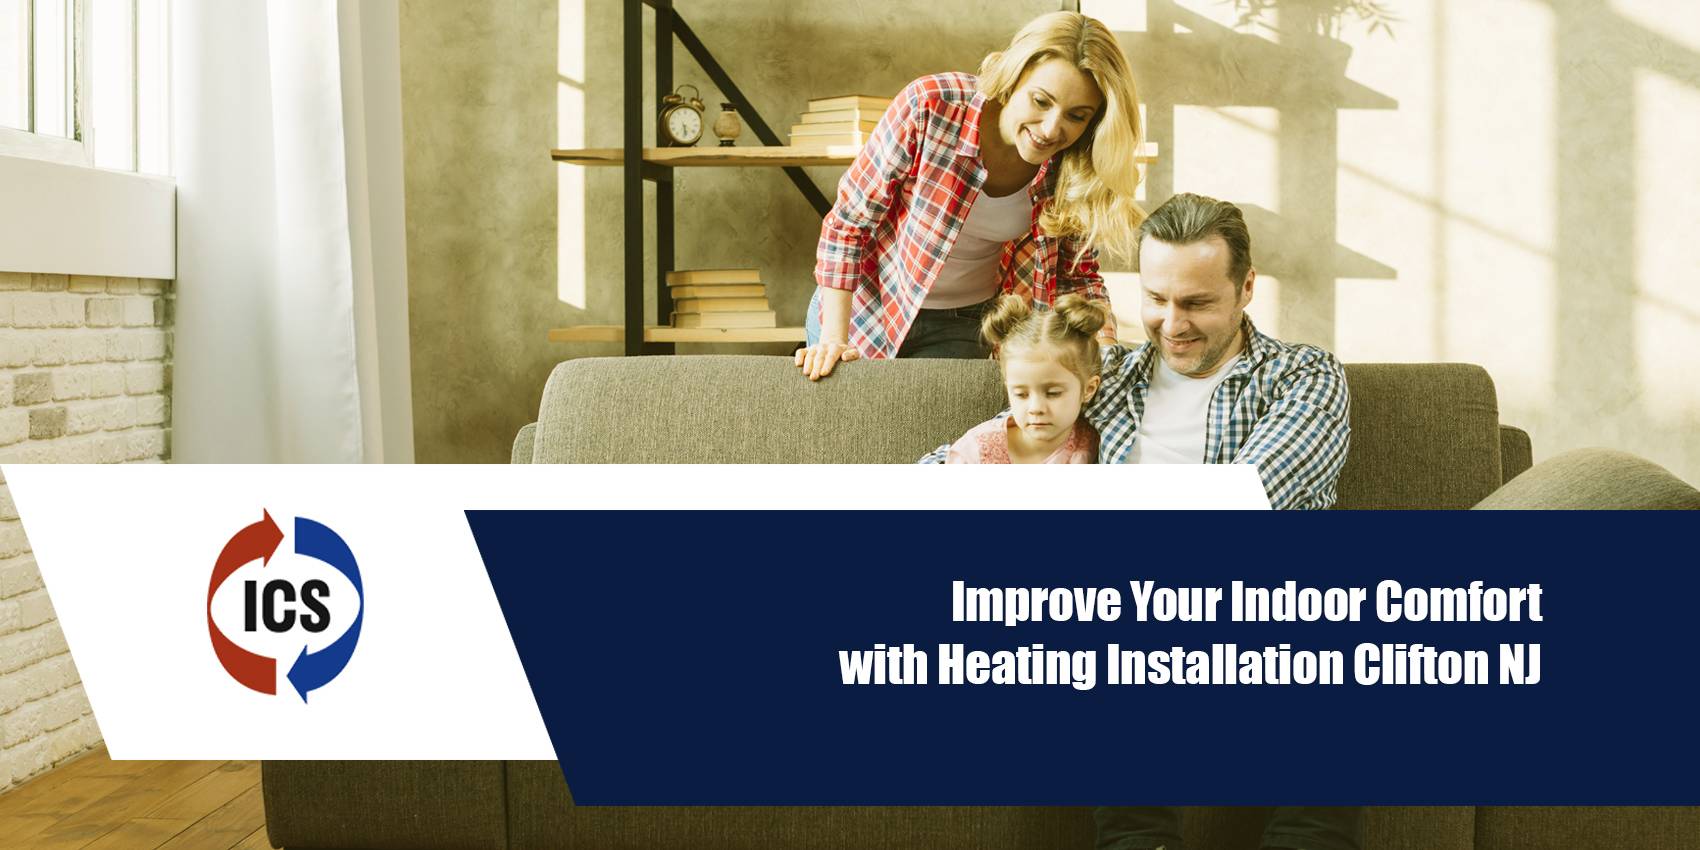 ICS_improve your indoor comfort with Heating Installation Clifton NJ